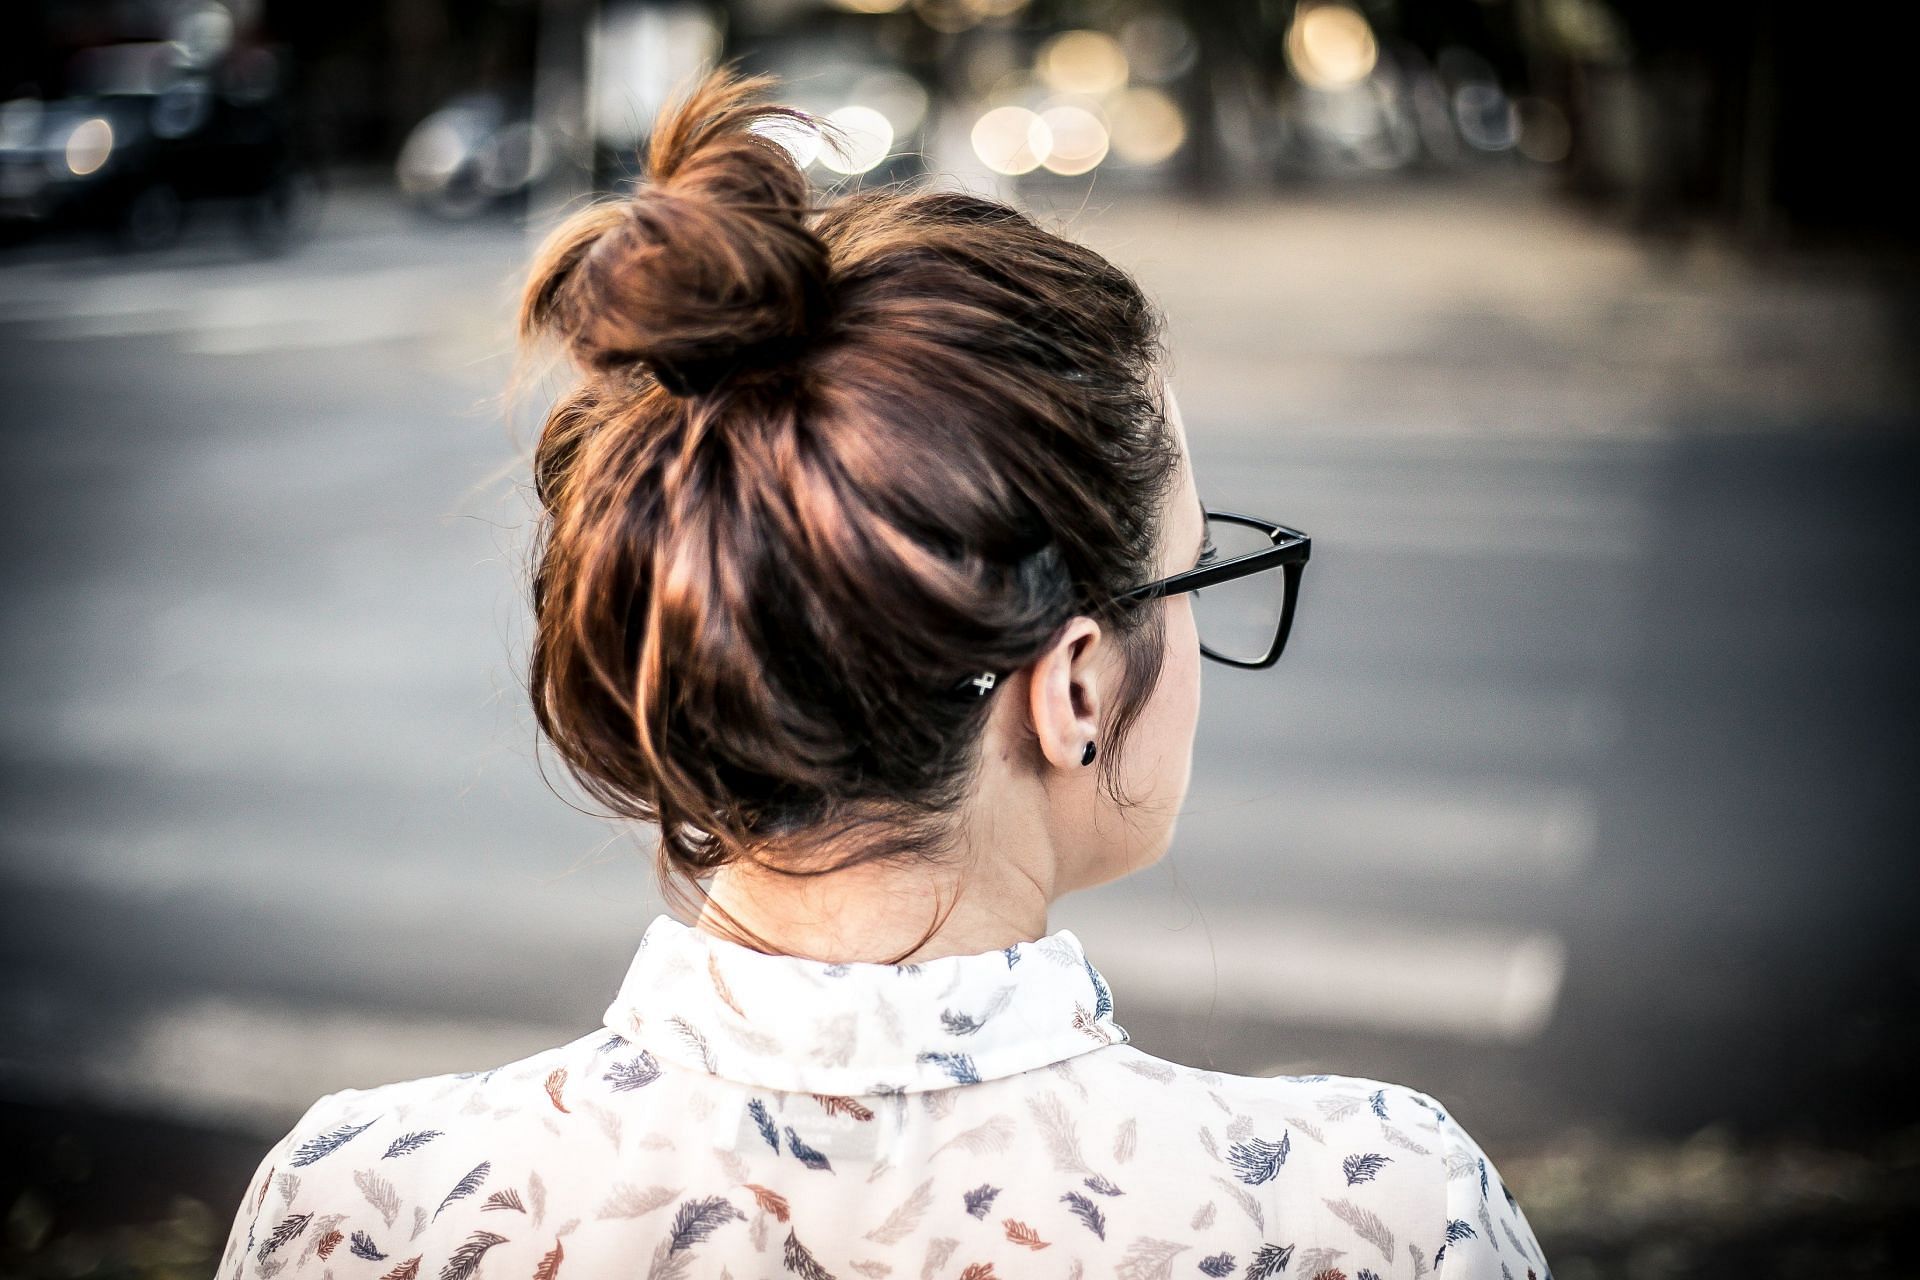 Loose hairstyles like buns are easier to fit into hair follicles (Image via Pexels/Garon Piceli)